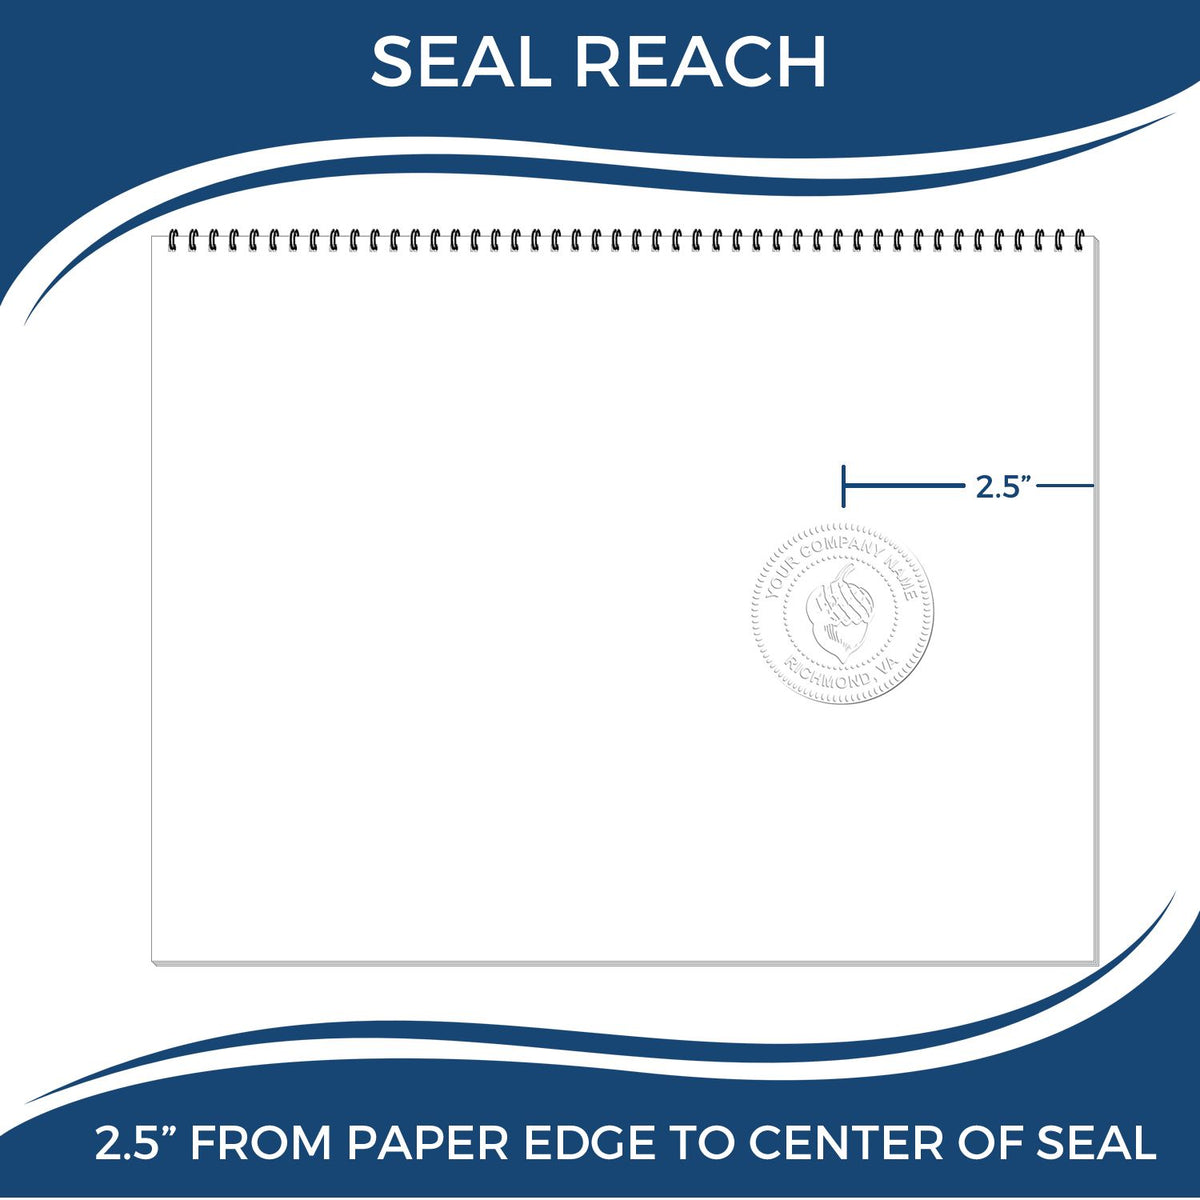 An infographic showing the seal reach which is represented by a ruler and a miniature seal image of the Long Reach Iowa Land Surveyor Seal